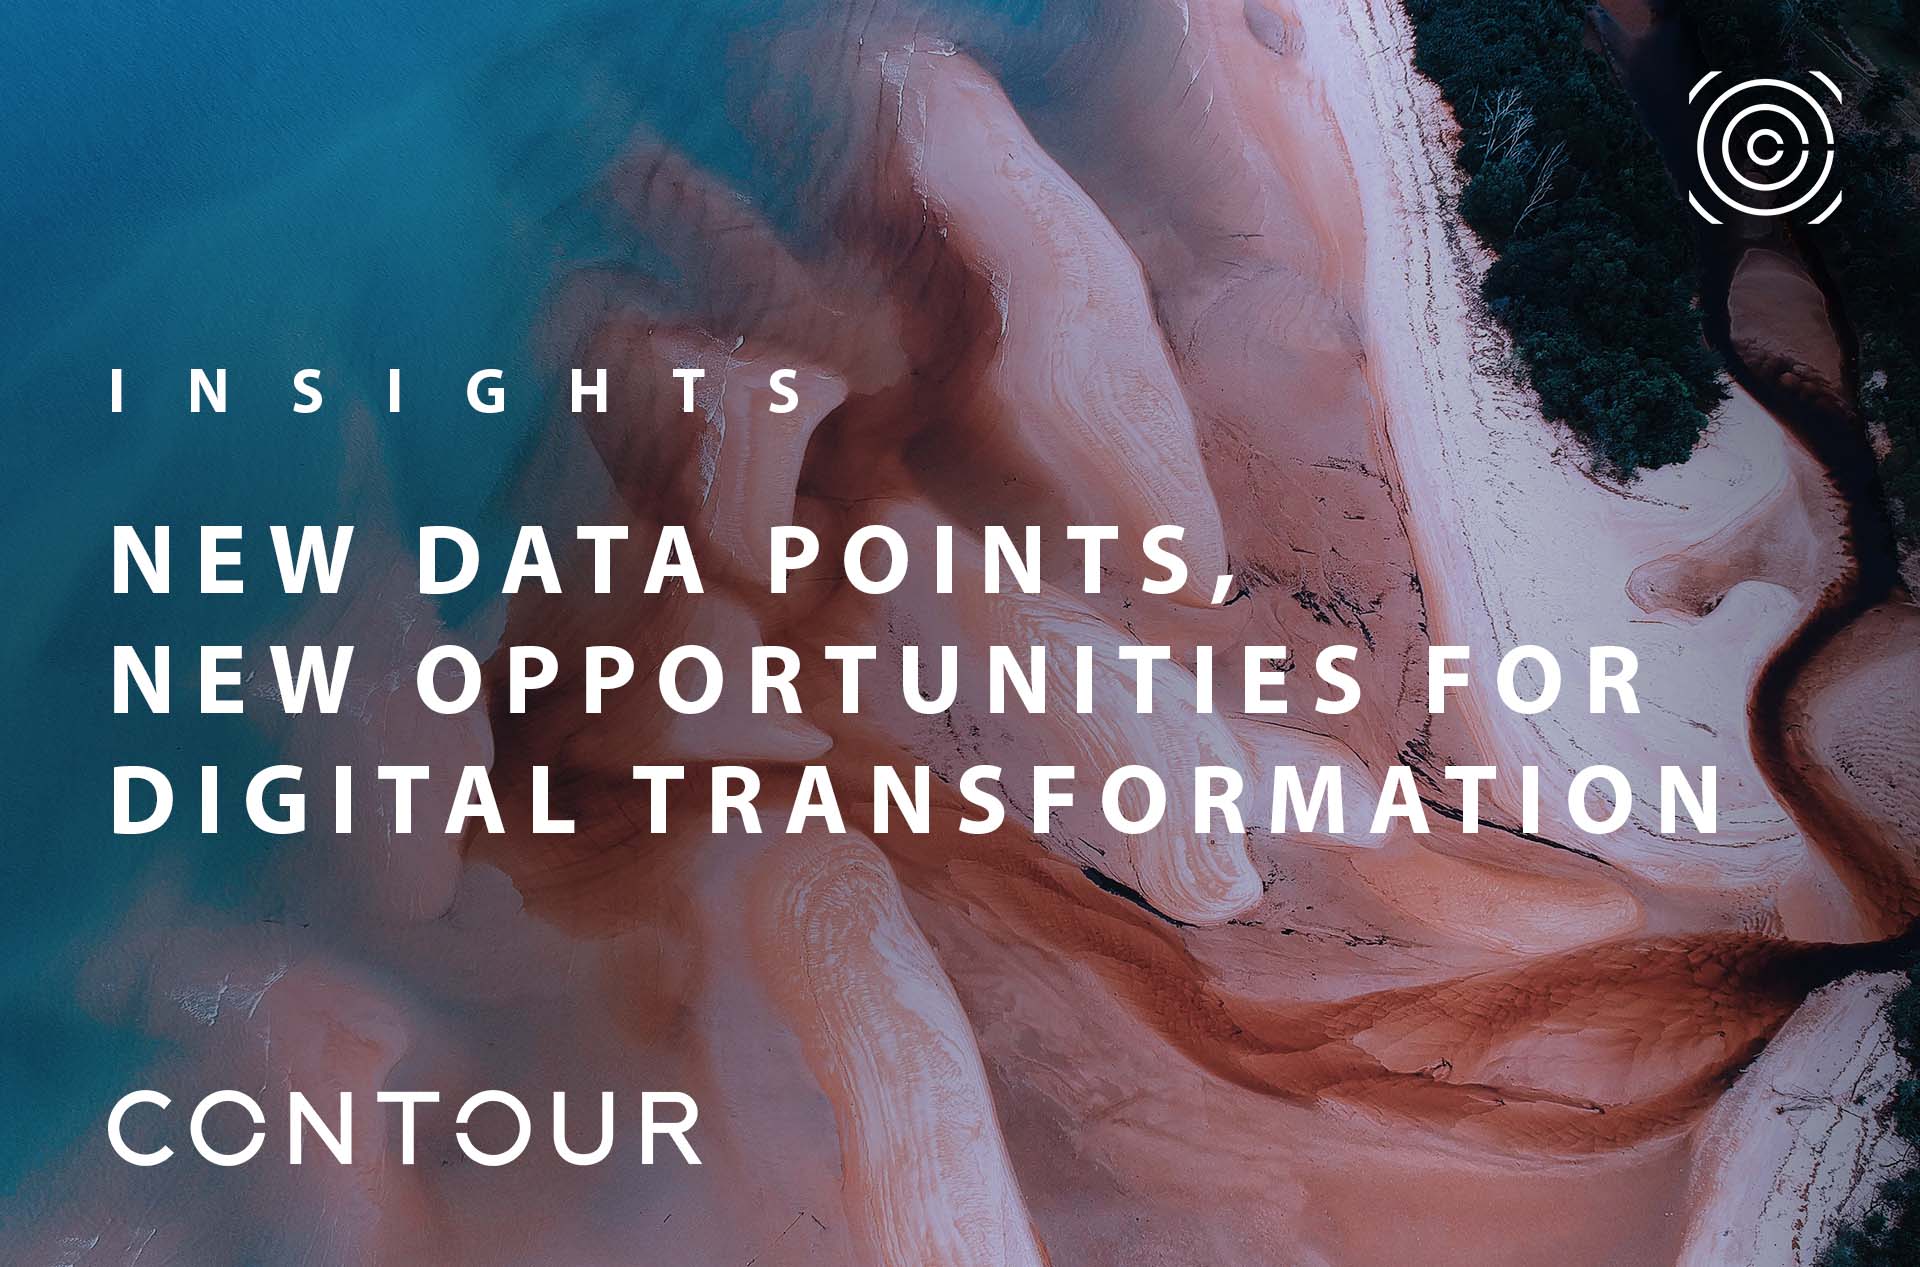 New data points, new opportunities for digital transformation